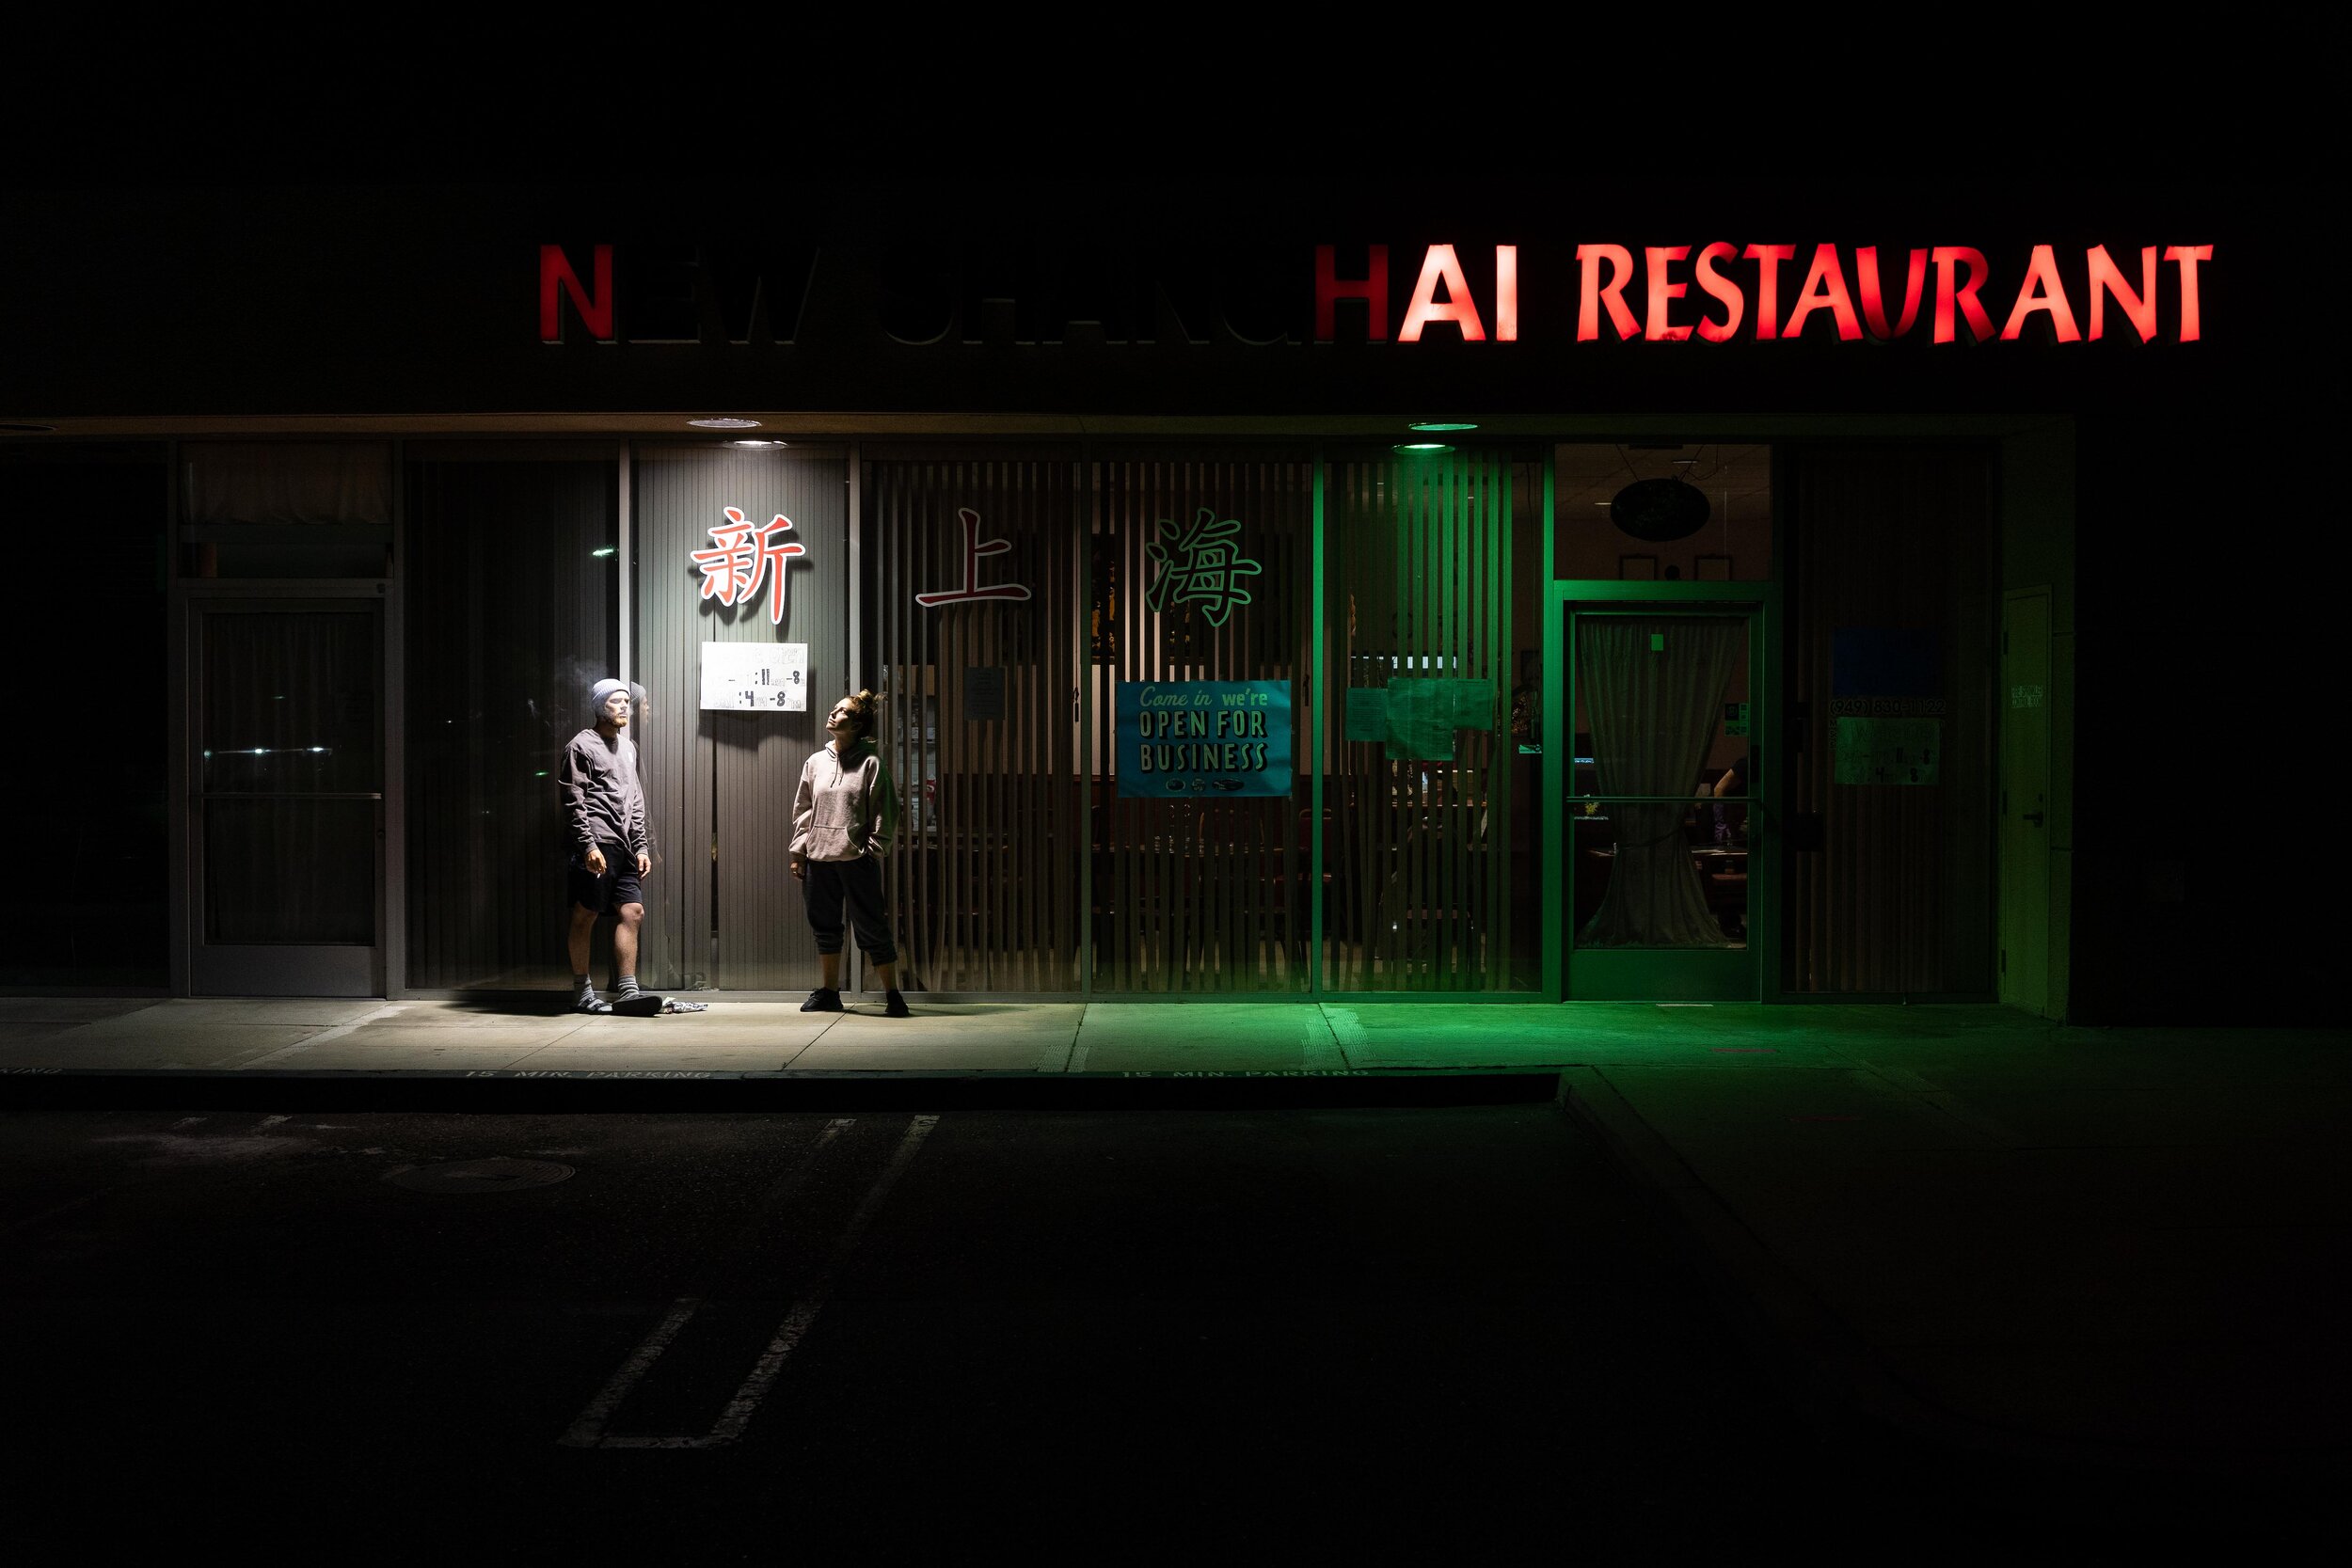  “We’ll meet you at our favorite late night spot. The AI restaurant.” - Tyler (Tyler, Jessie) | 05/01/20 (Lake Forest, CA) 